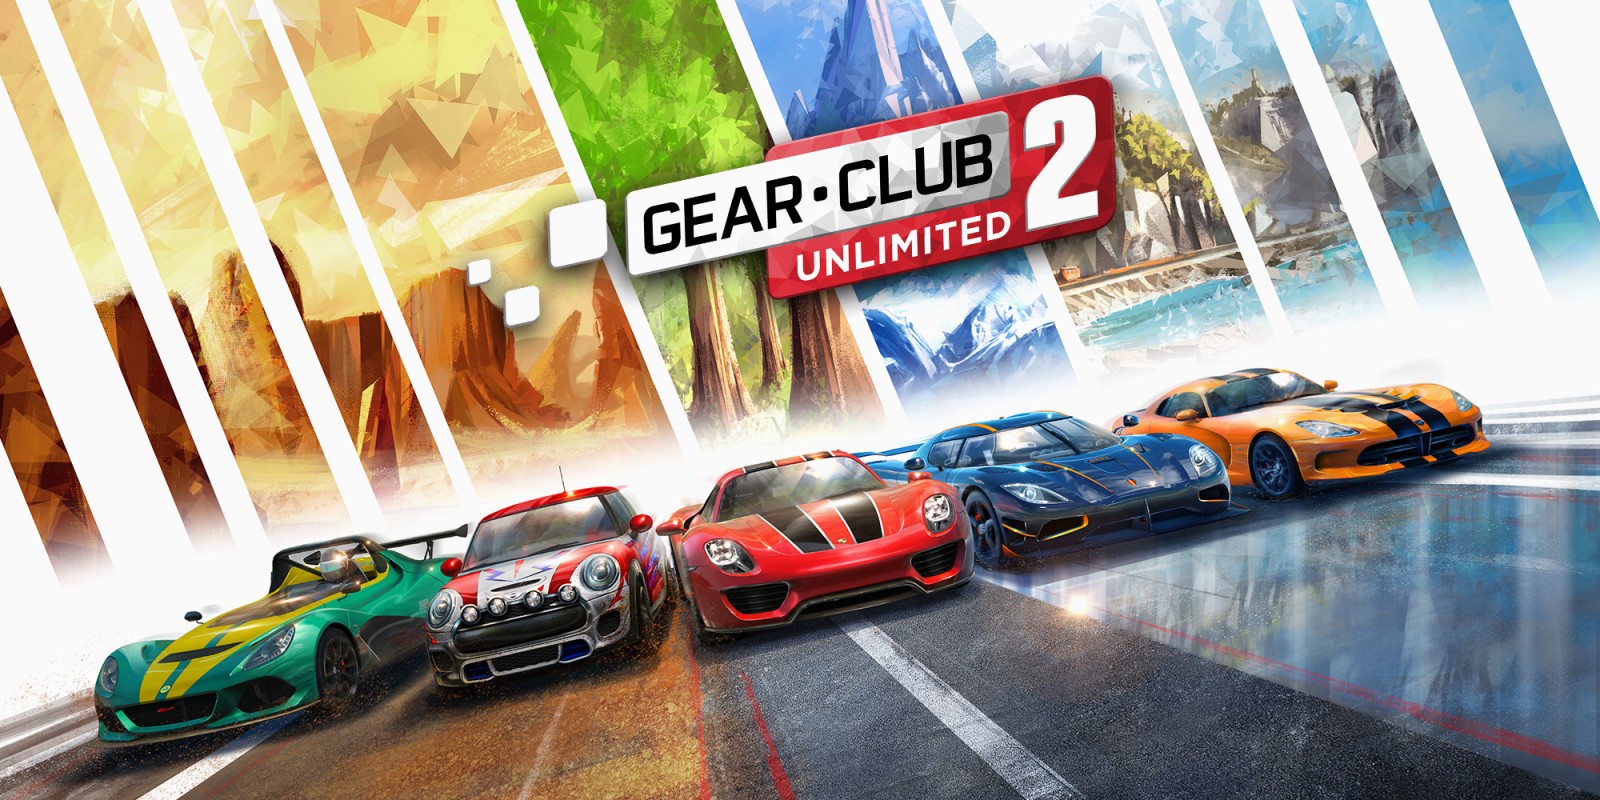 Will The be a Gear.Club Unlimited 3?